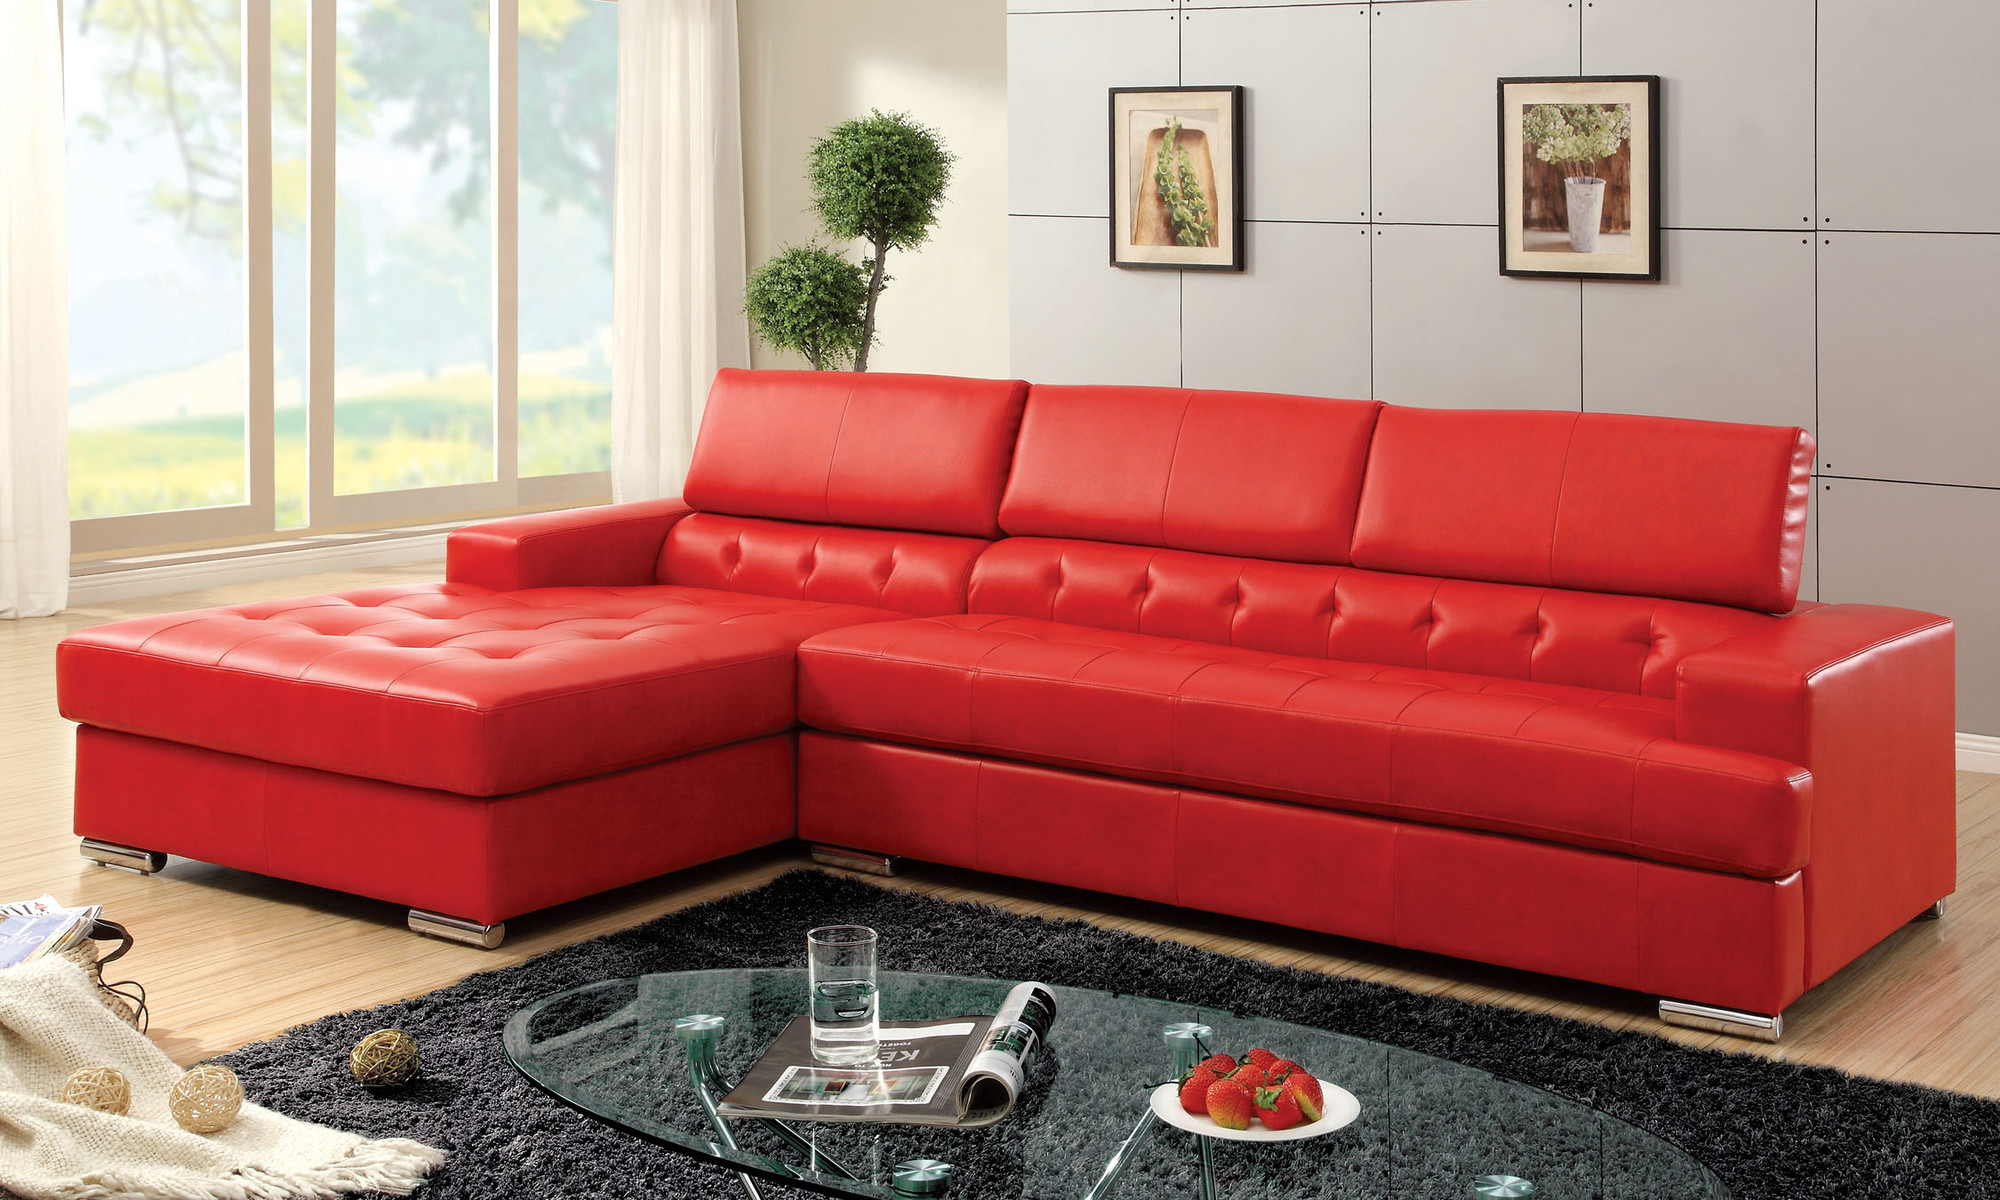 Modern Living Room Ideas With Red Leather Sofa